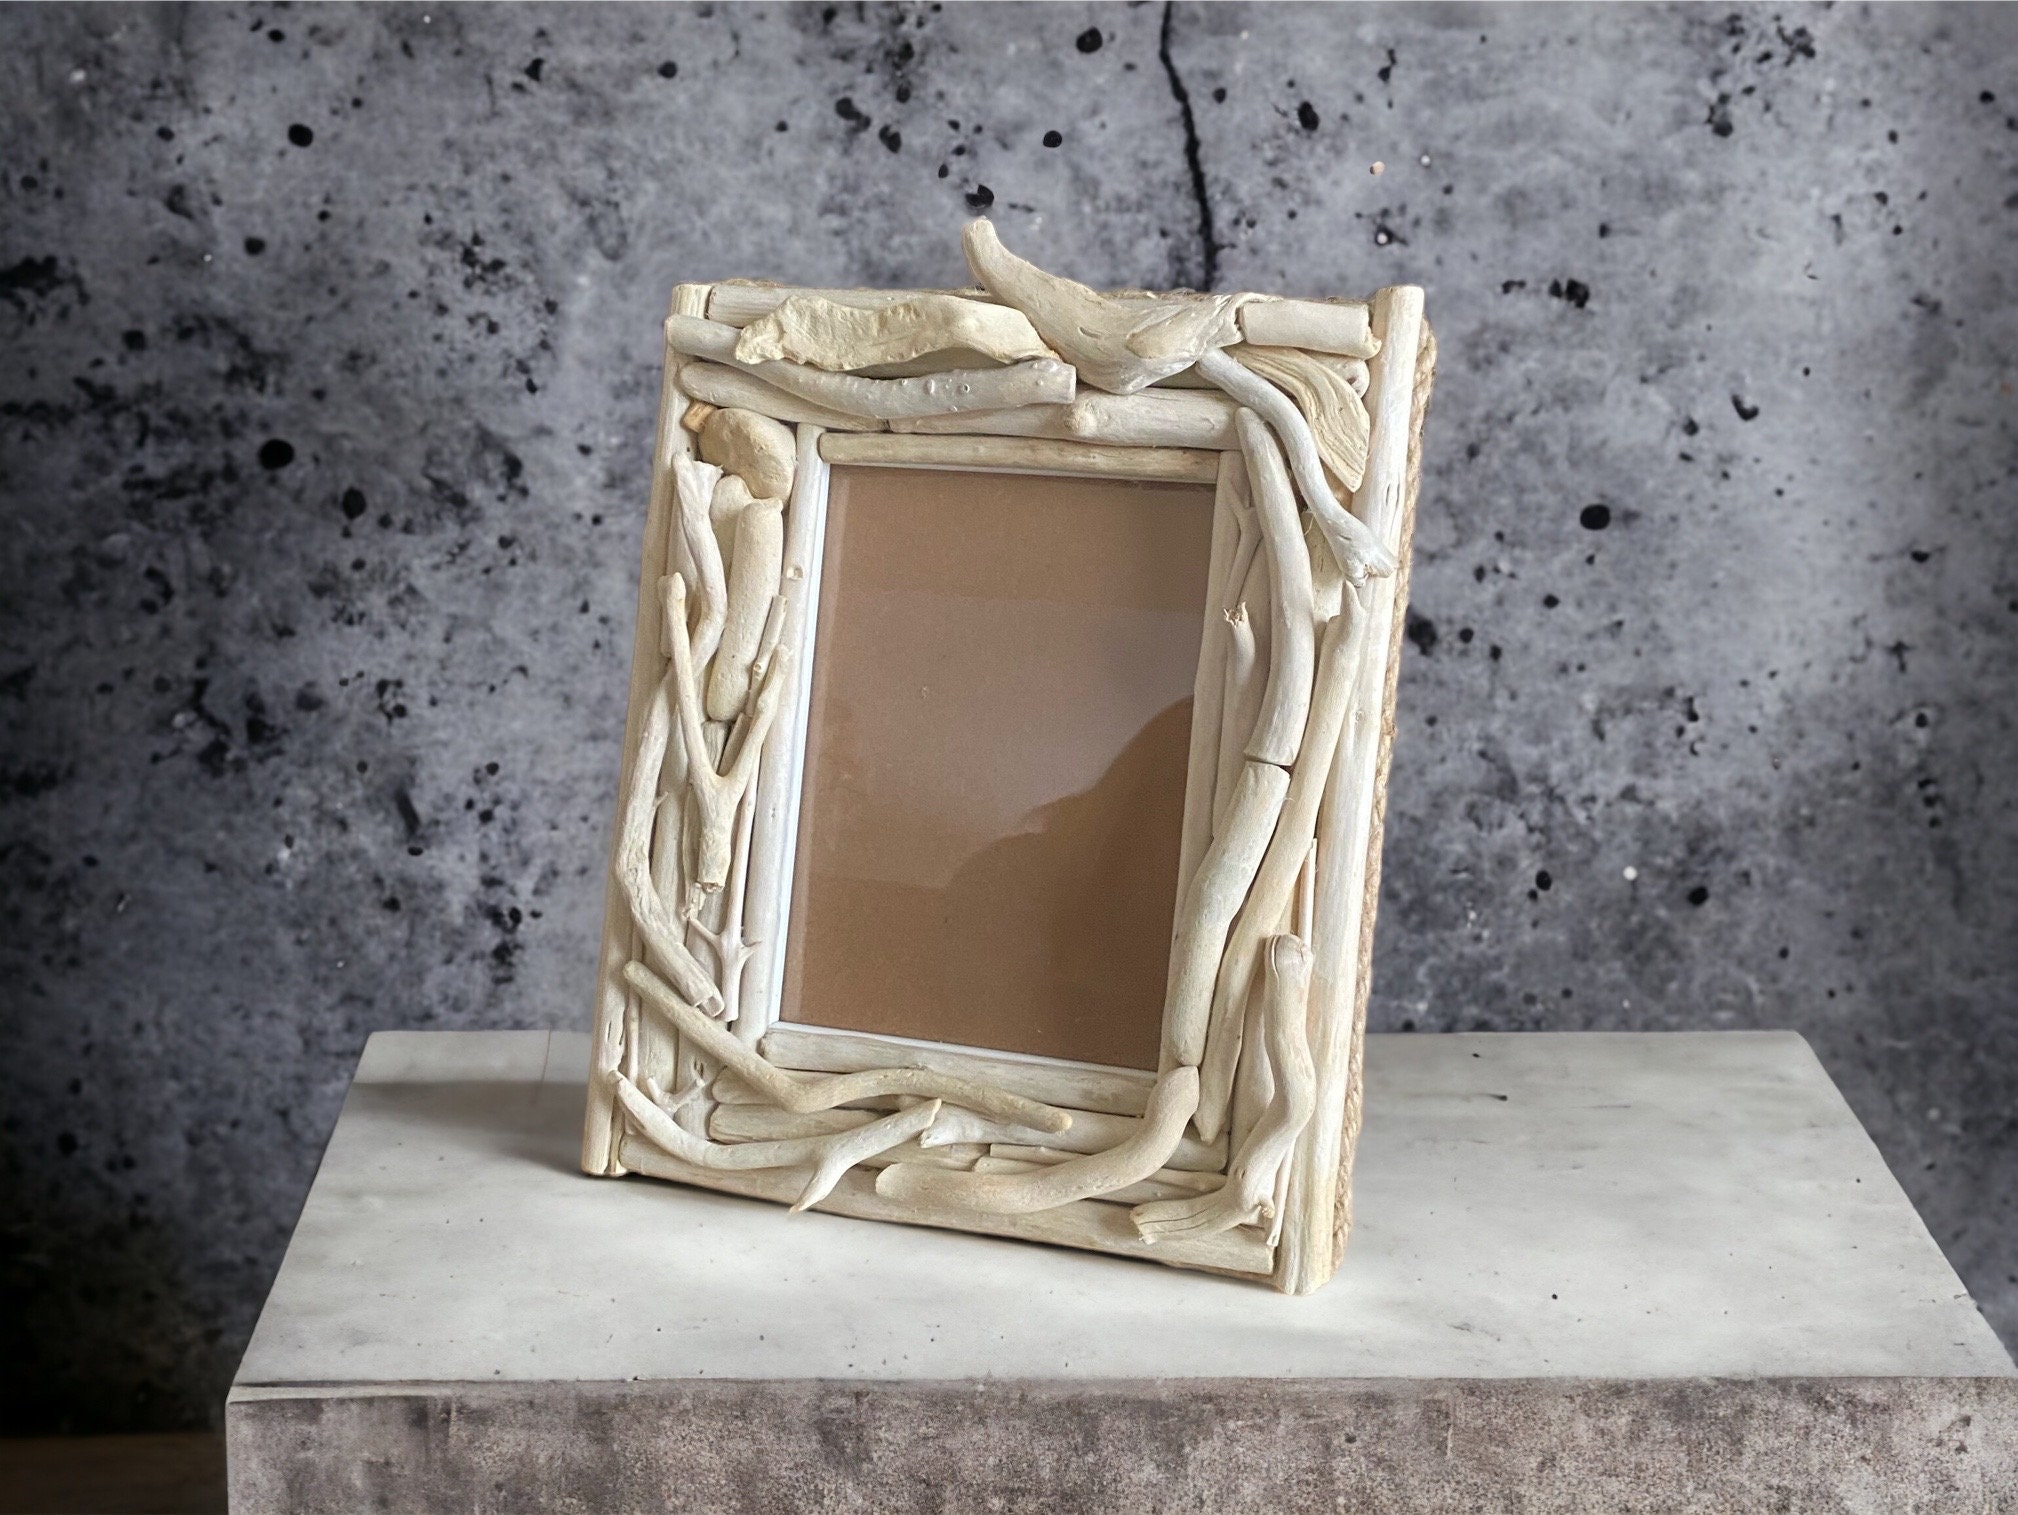 4×6-inch 2-14 Opening Driftwood Picture Frame